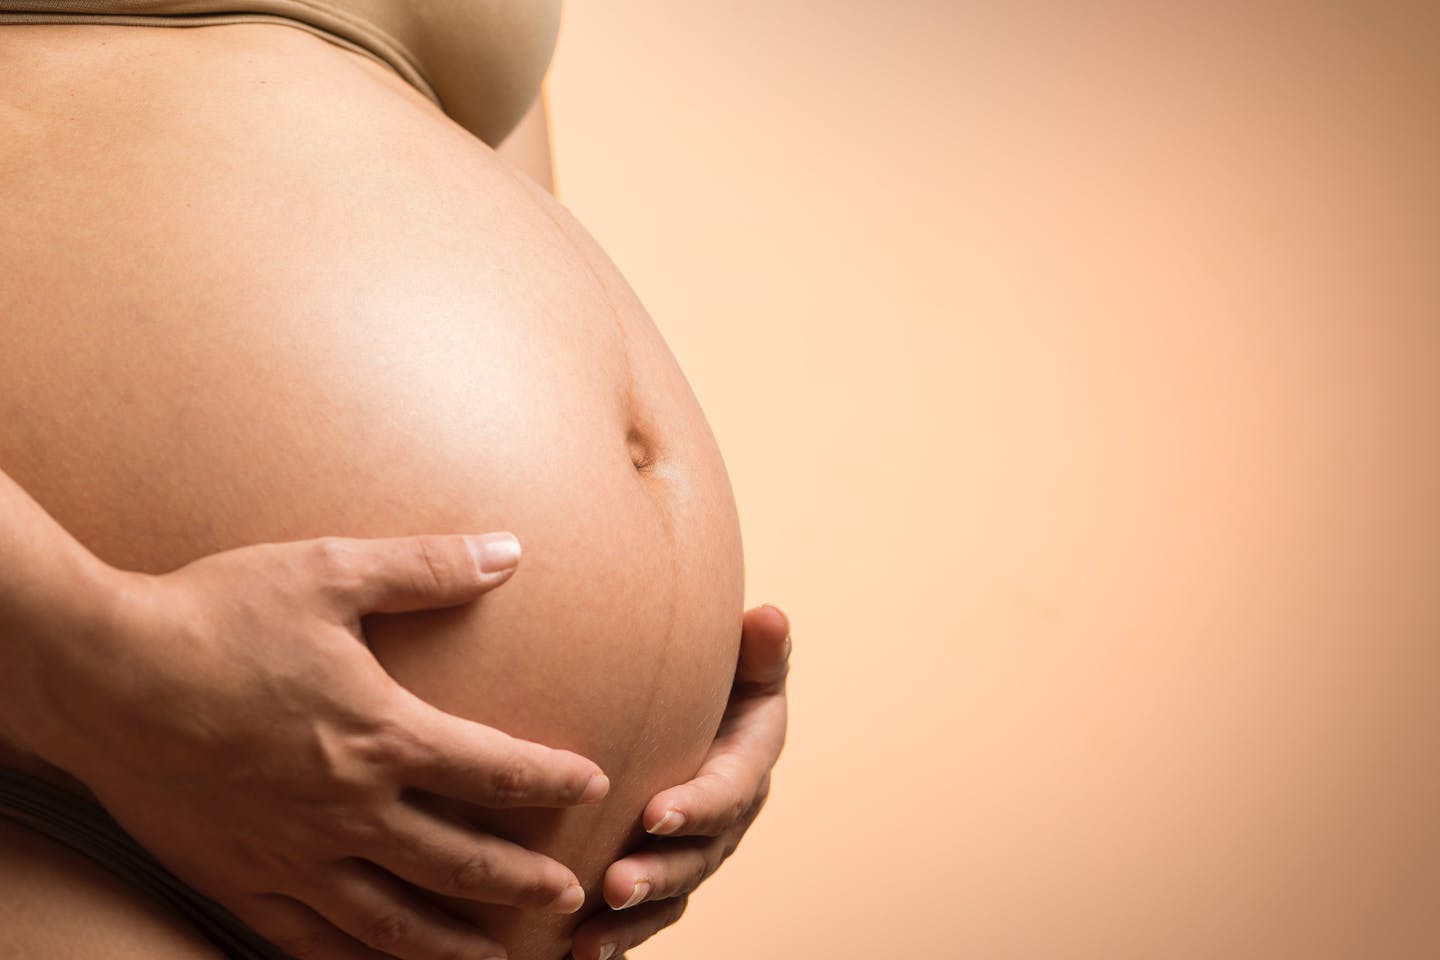 Environmental stress can be passed on through pregnancy | News |  Eco-Business | Asia Pacific